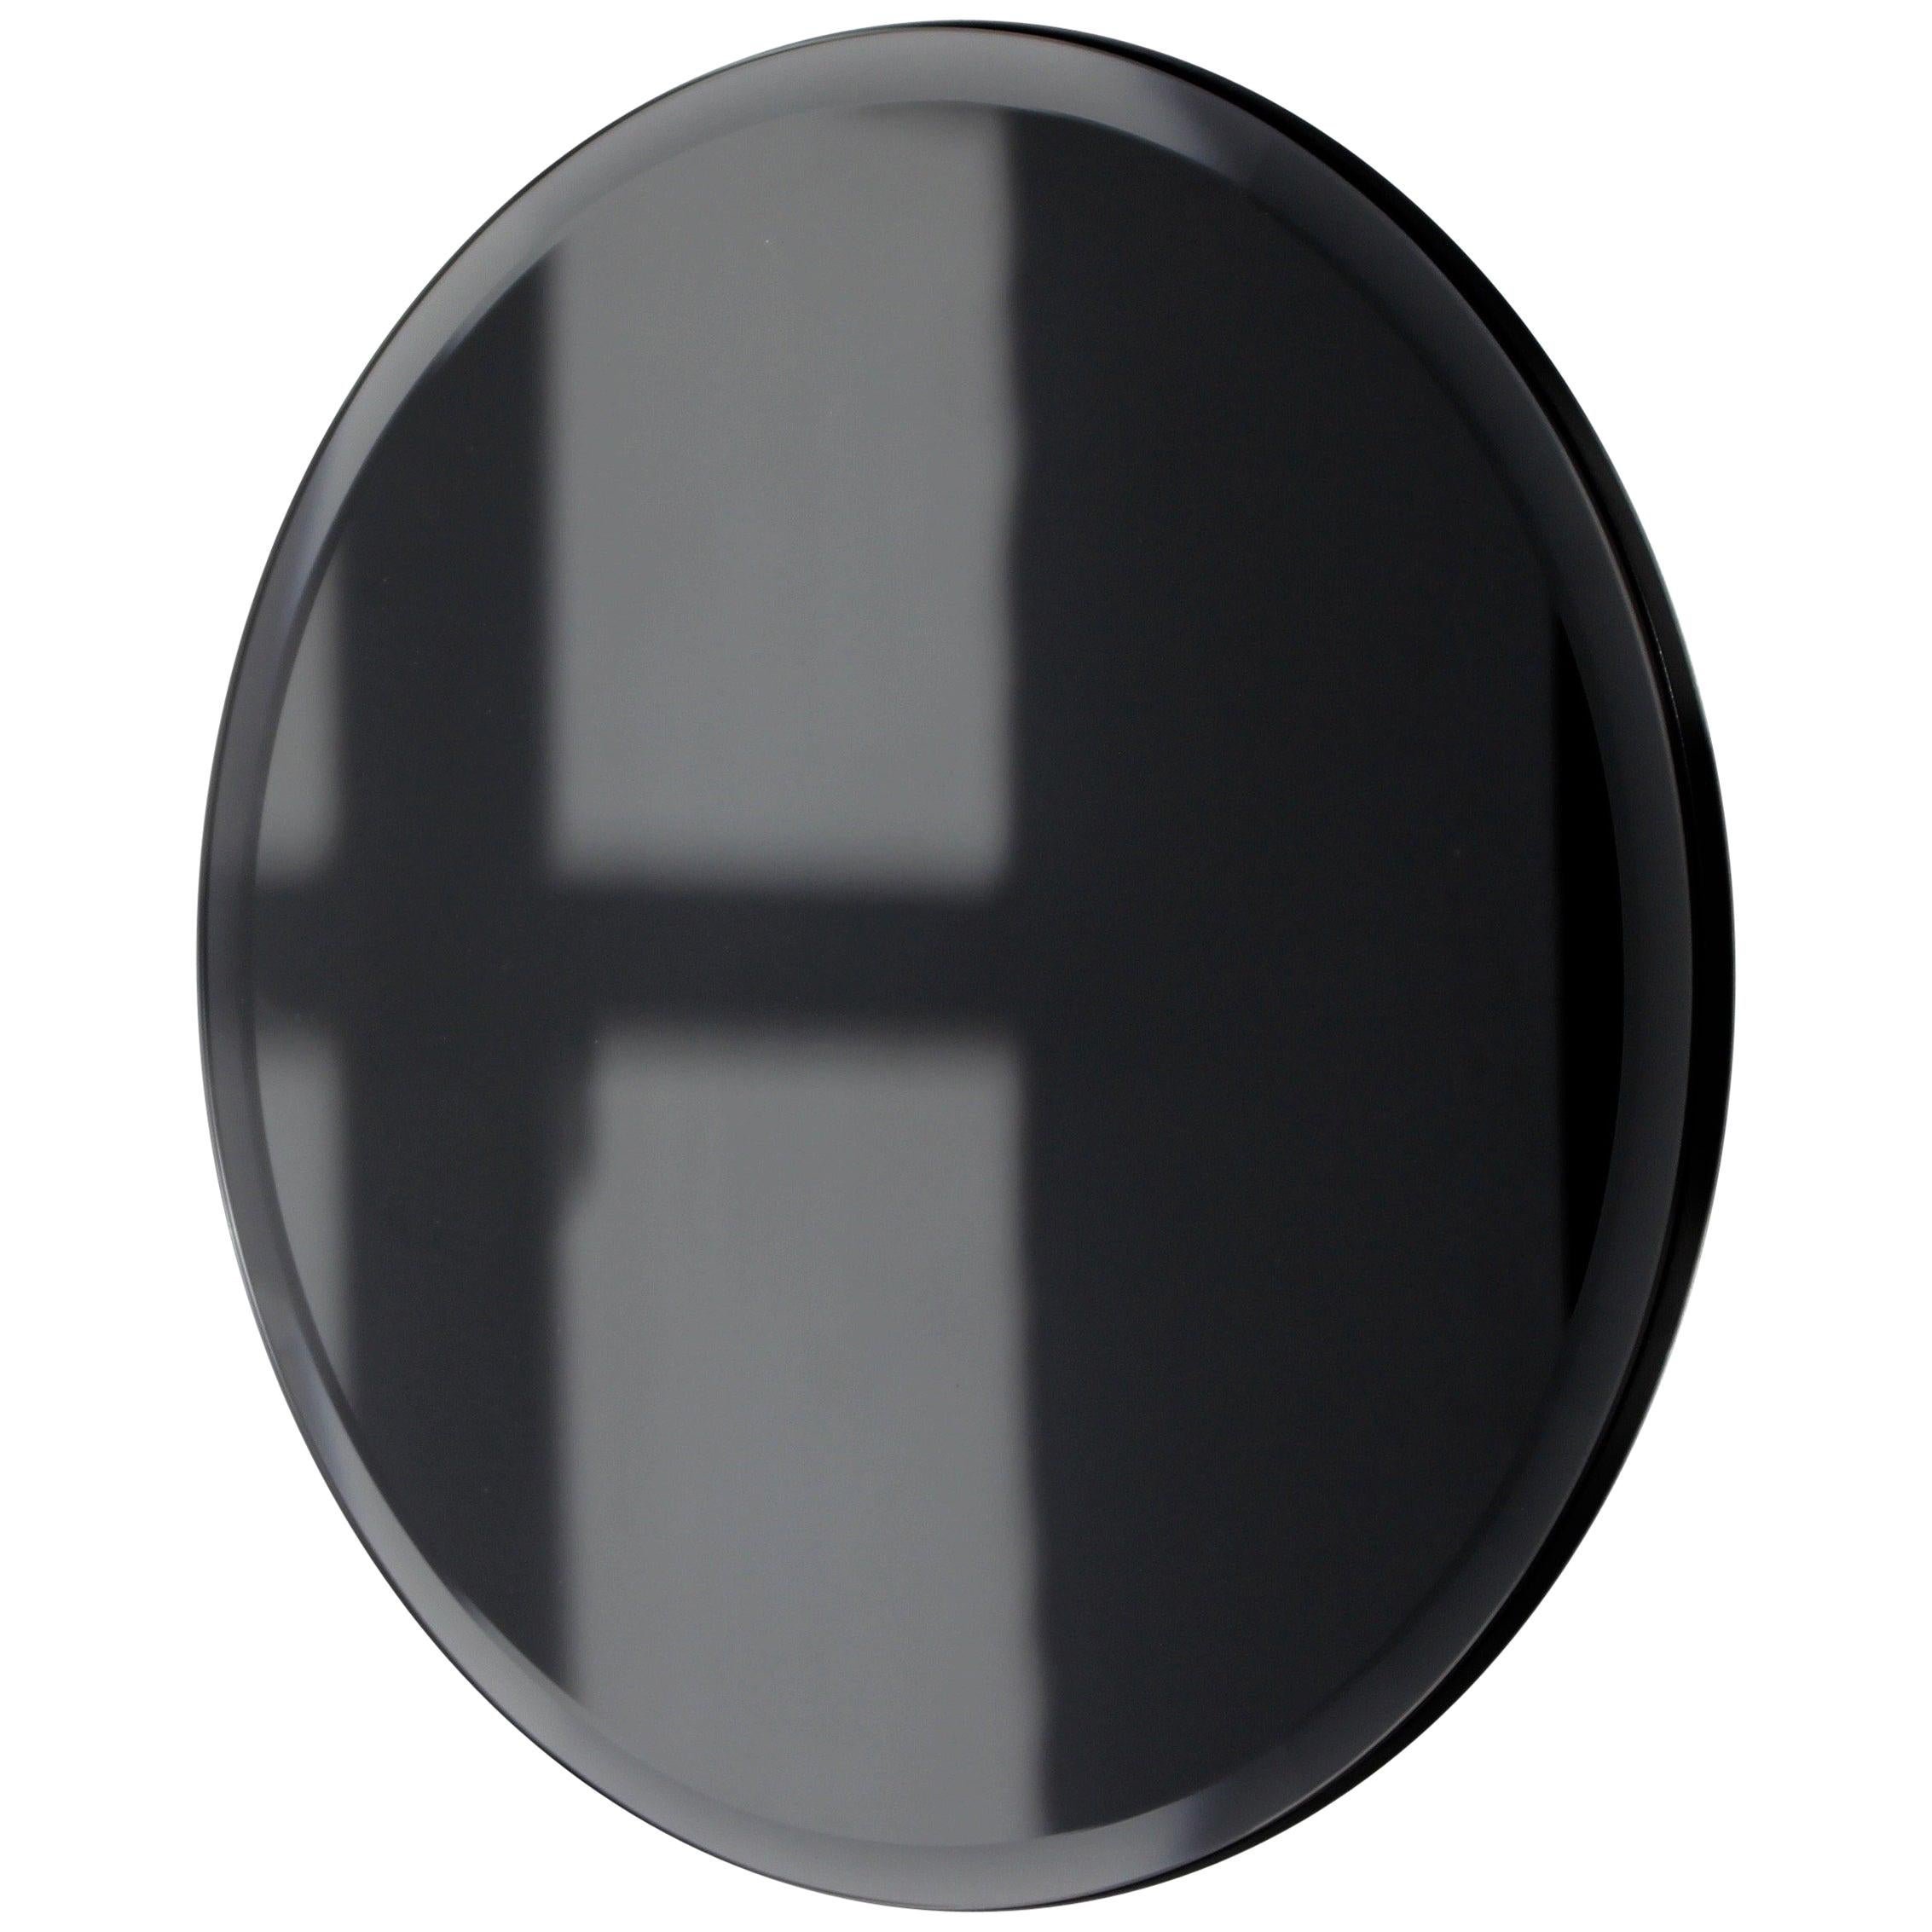 Orbis Bevelled Black Tinted Round Frameless Mirror Faux Leather Backing - Small